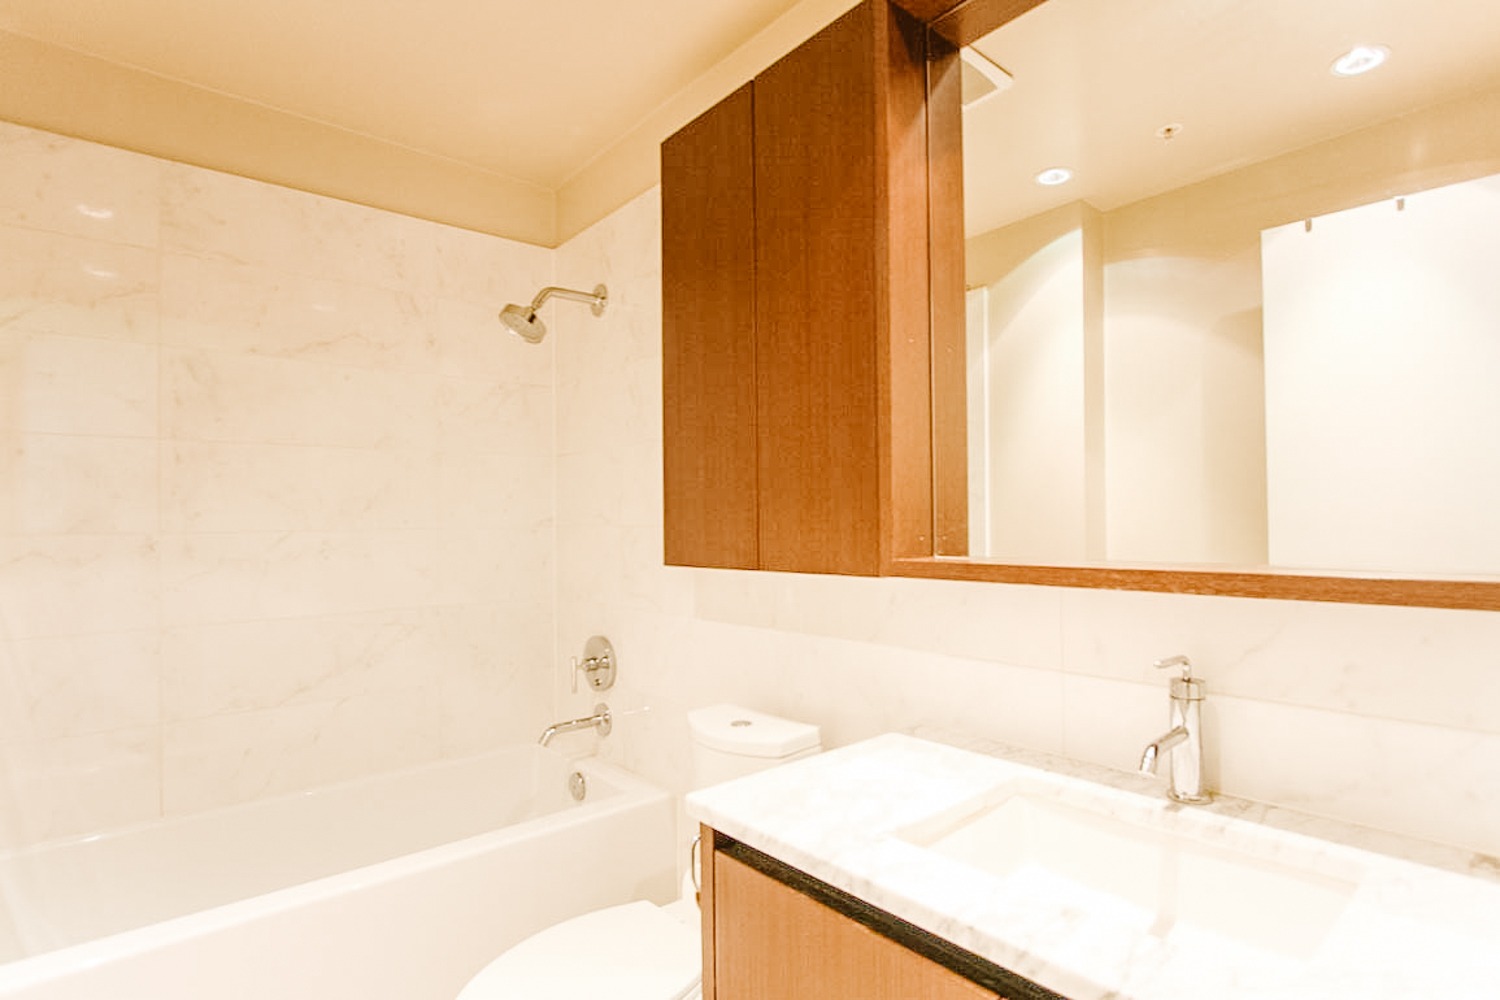 one-bedroom-condo-for-rent-in-lower-lonsdale-north-vancouver-2